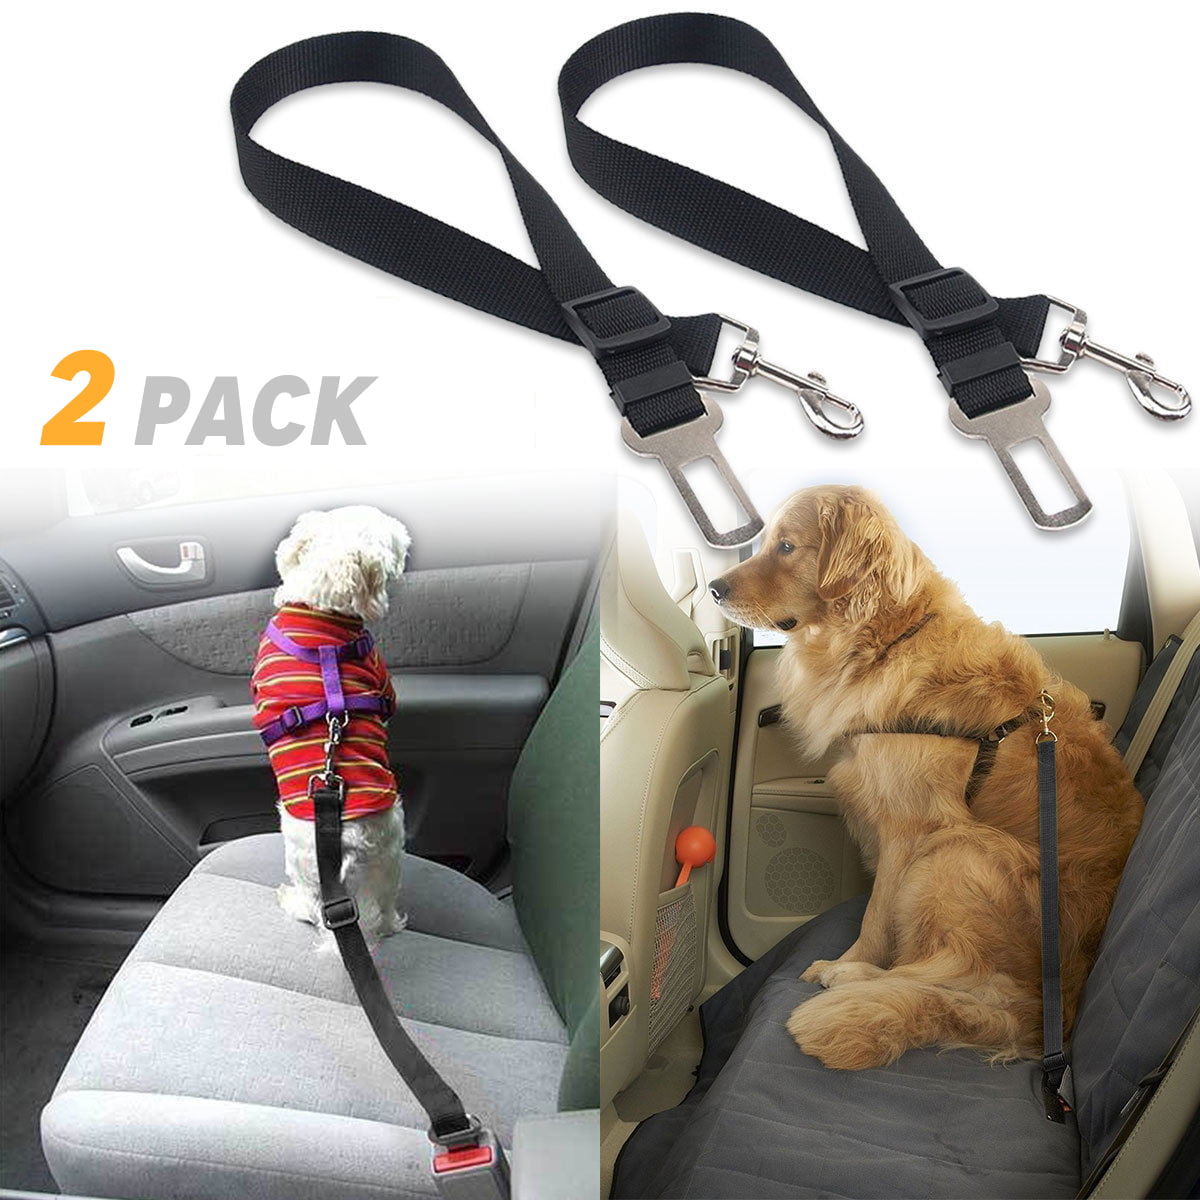 Single or Double Pack Car Safety Seat Belt Harness Leash Travel for Pet Dog Cat